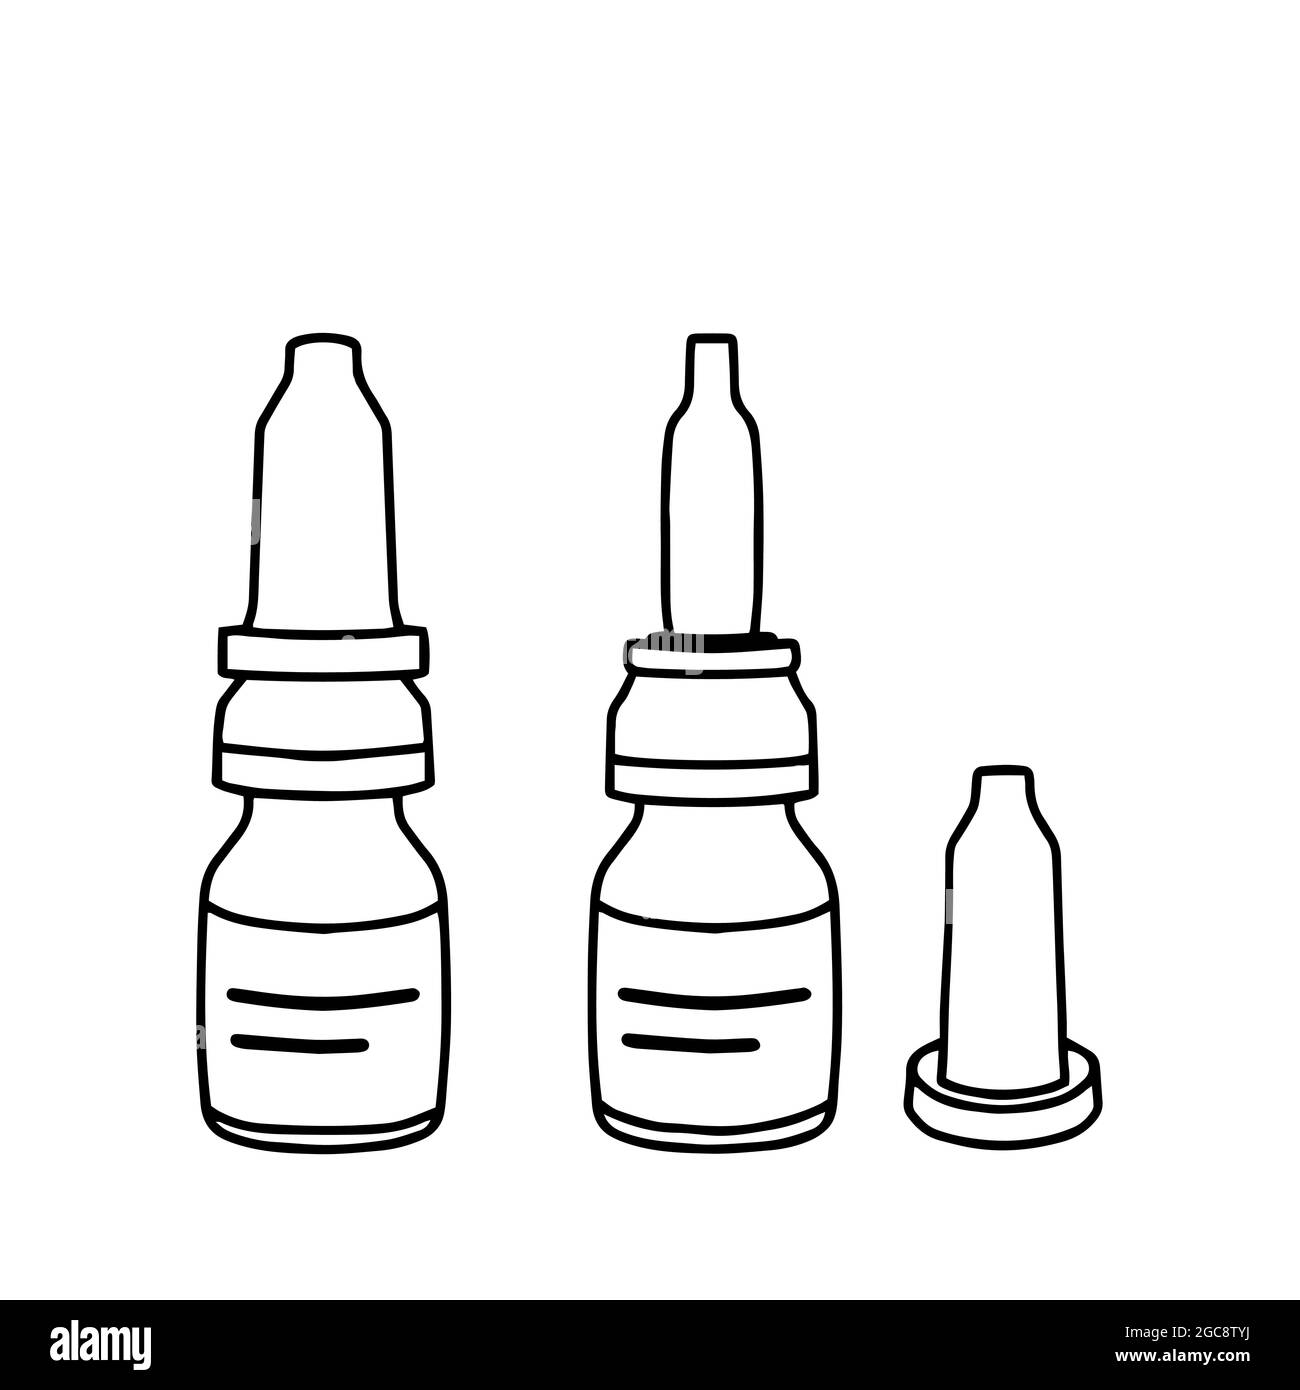 Two pharmacy bottles with a pipette in the style of doodles in a vector format, suitable for use on the Internet, print or advertising. Stock Vector